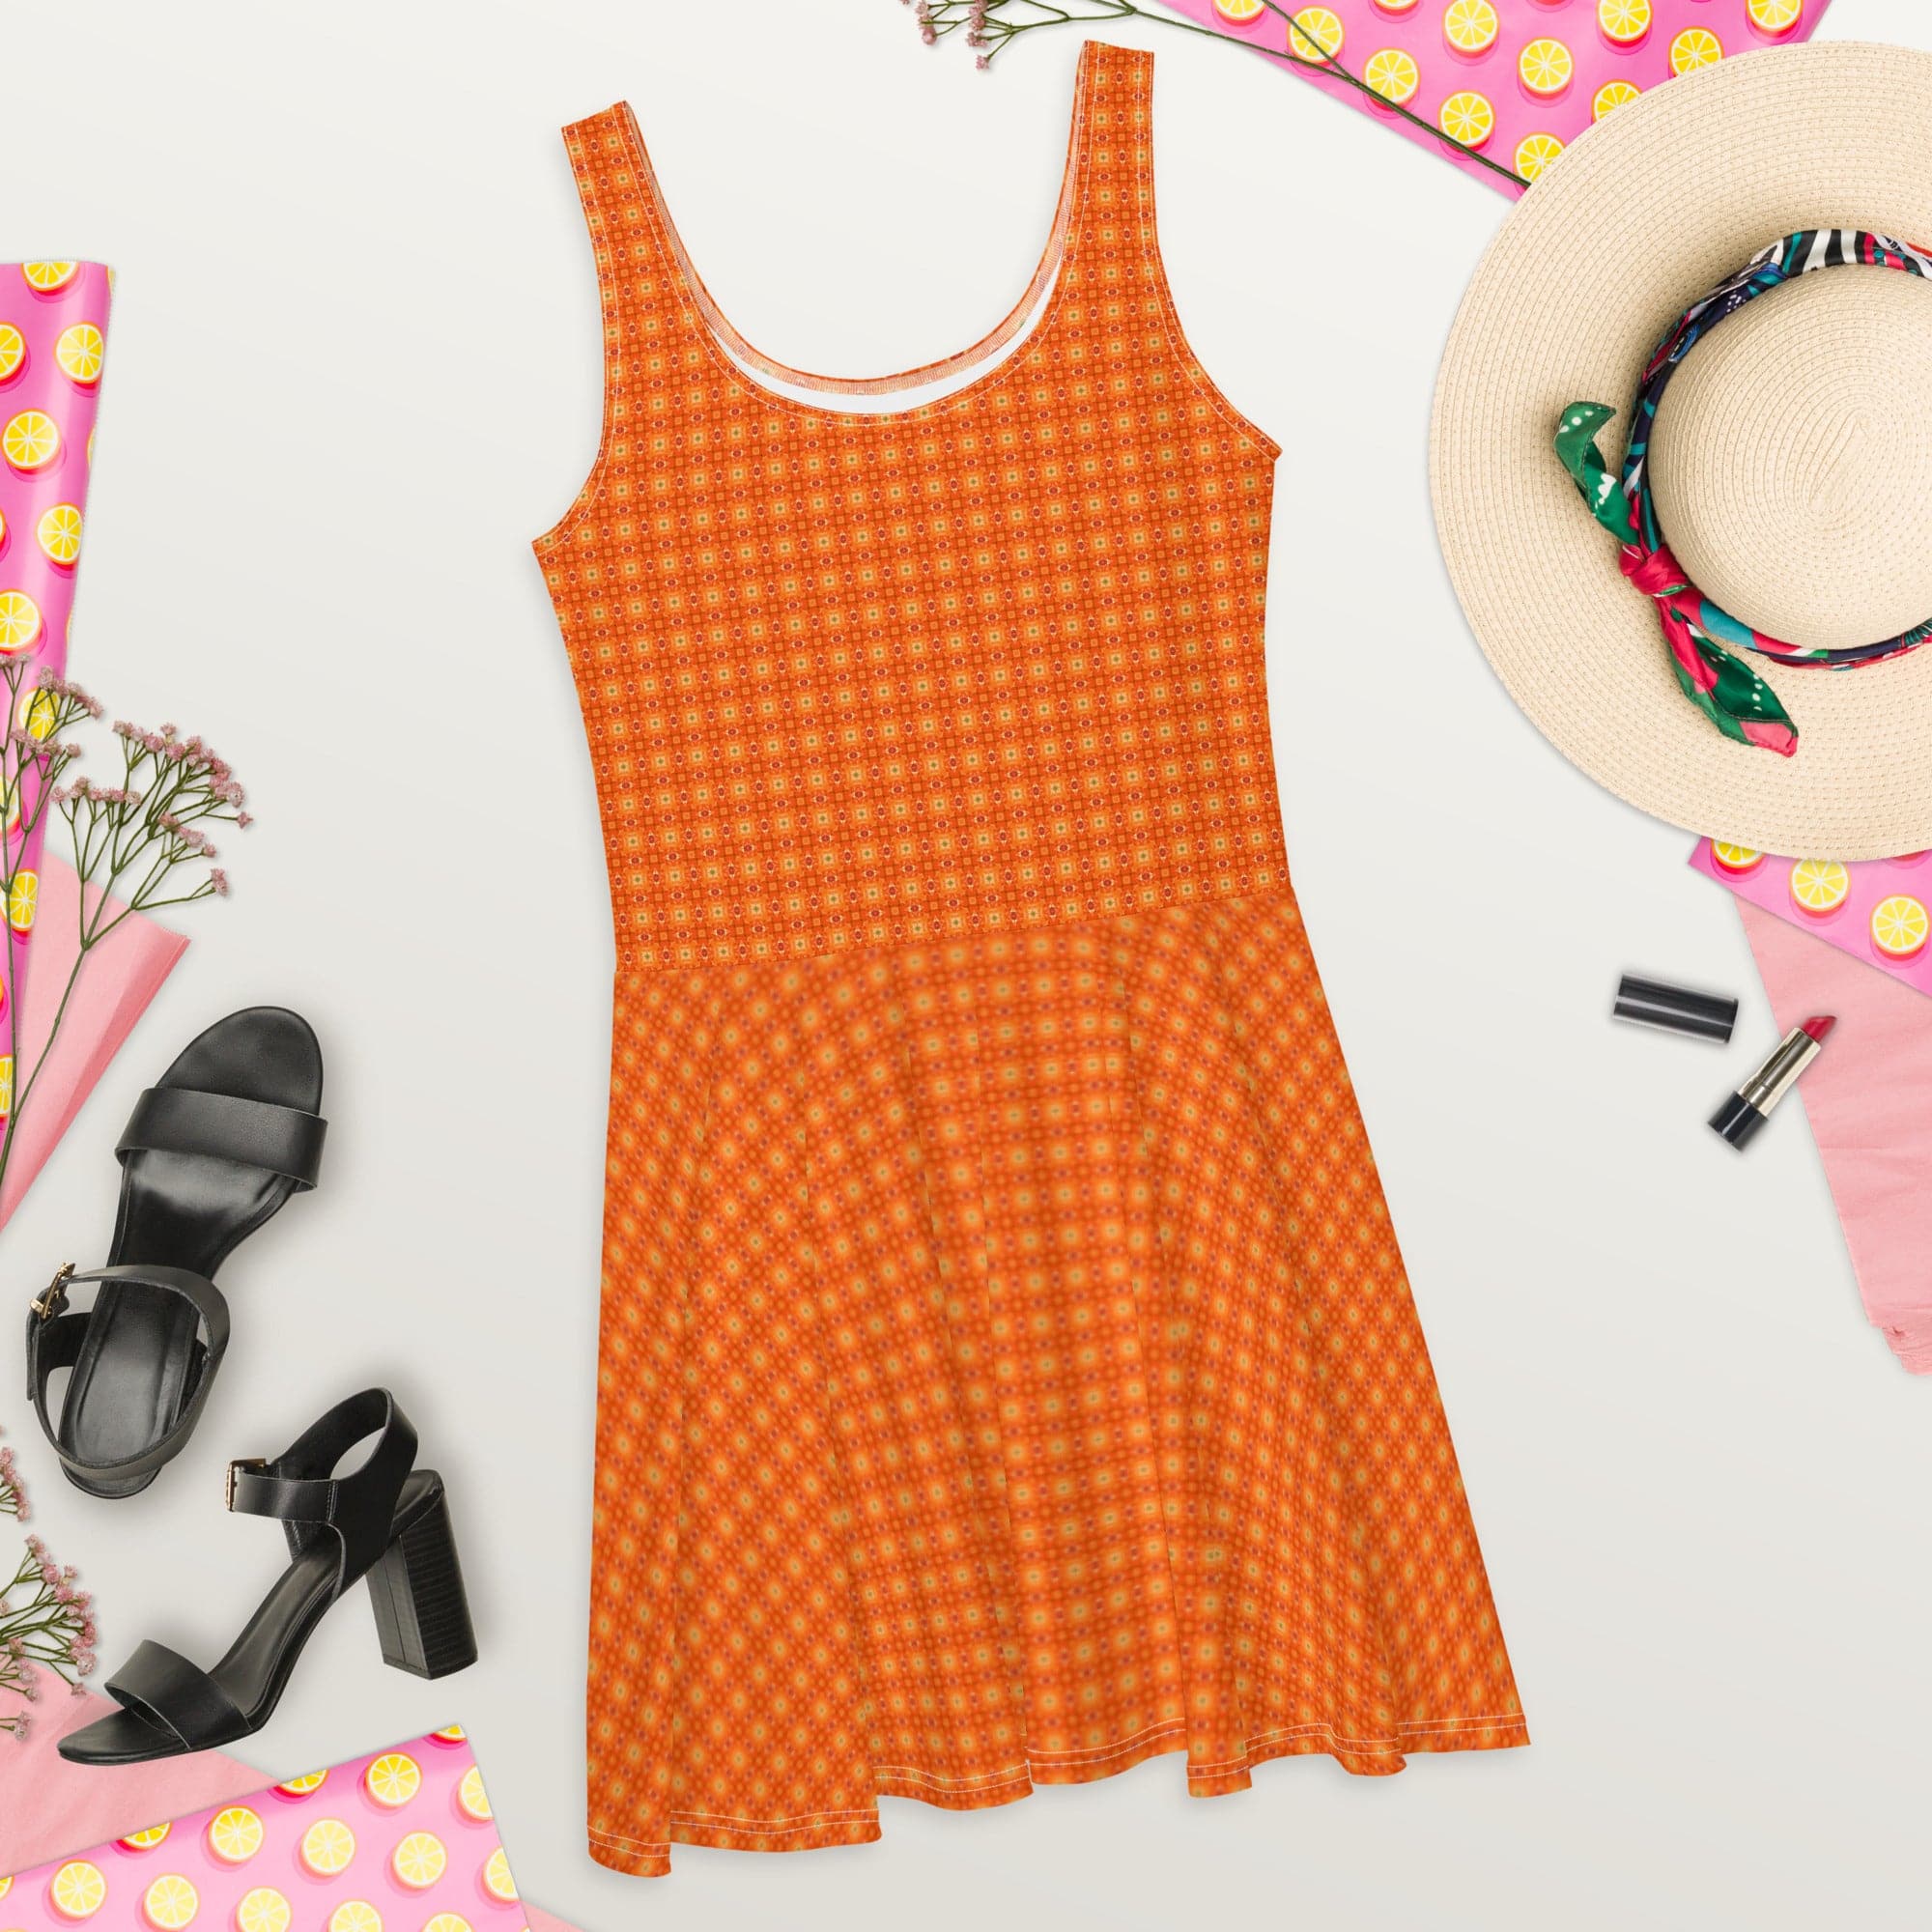 Soft orange and Yellow patterned Skater Dress, by Sensus Studio